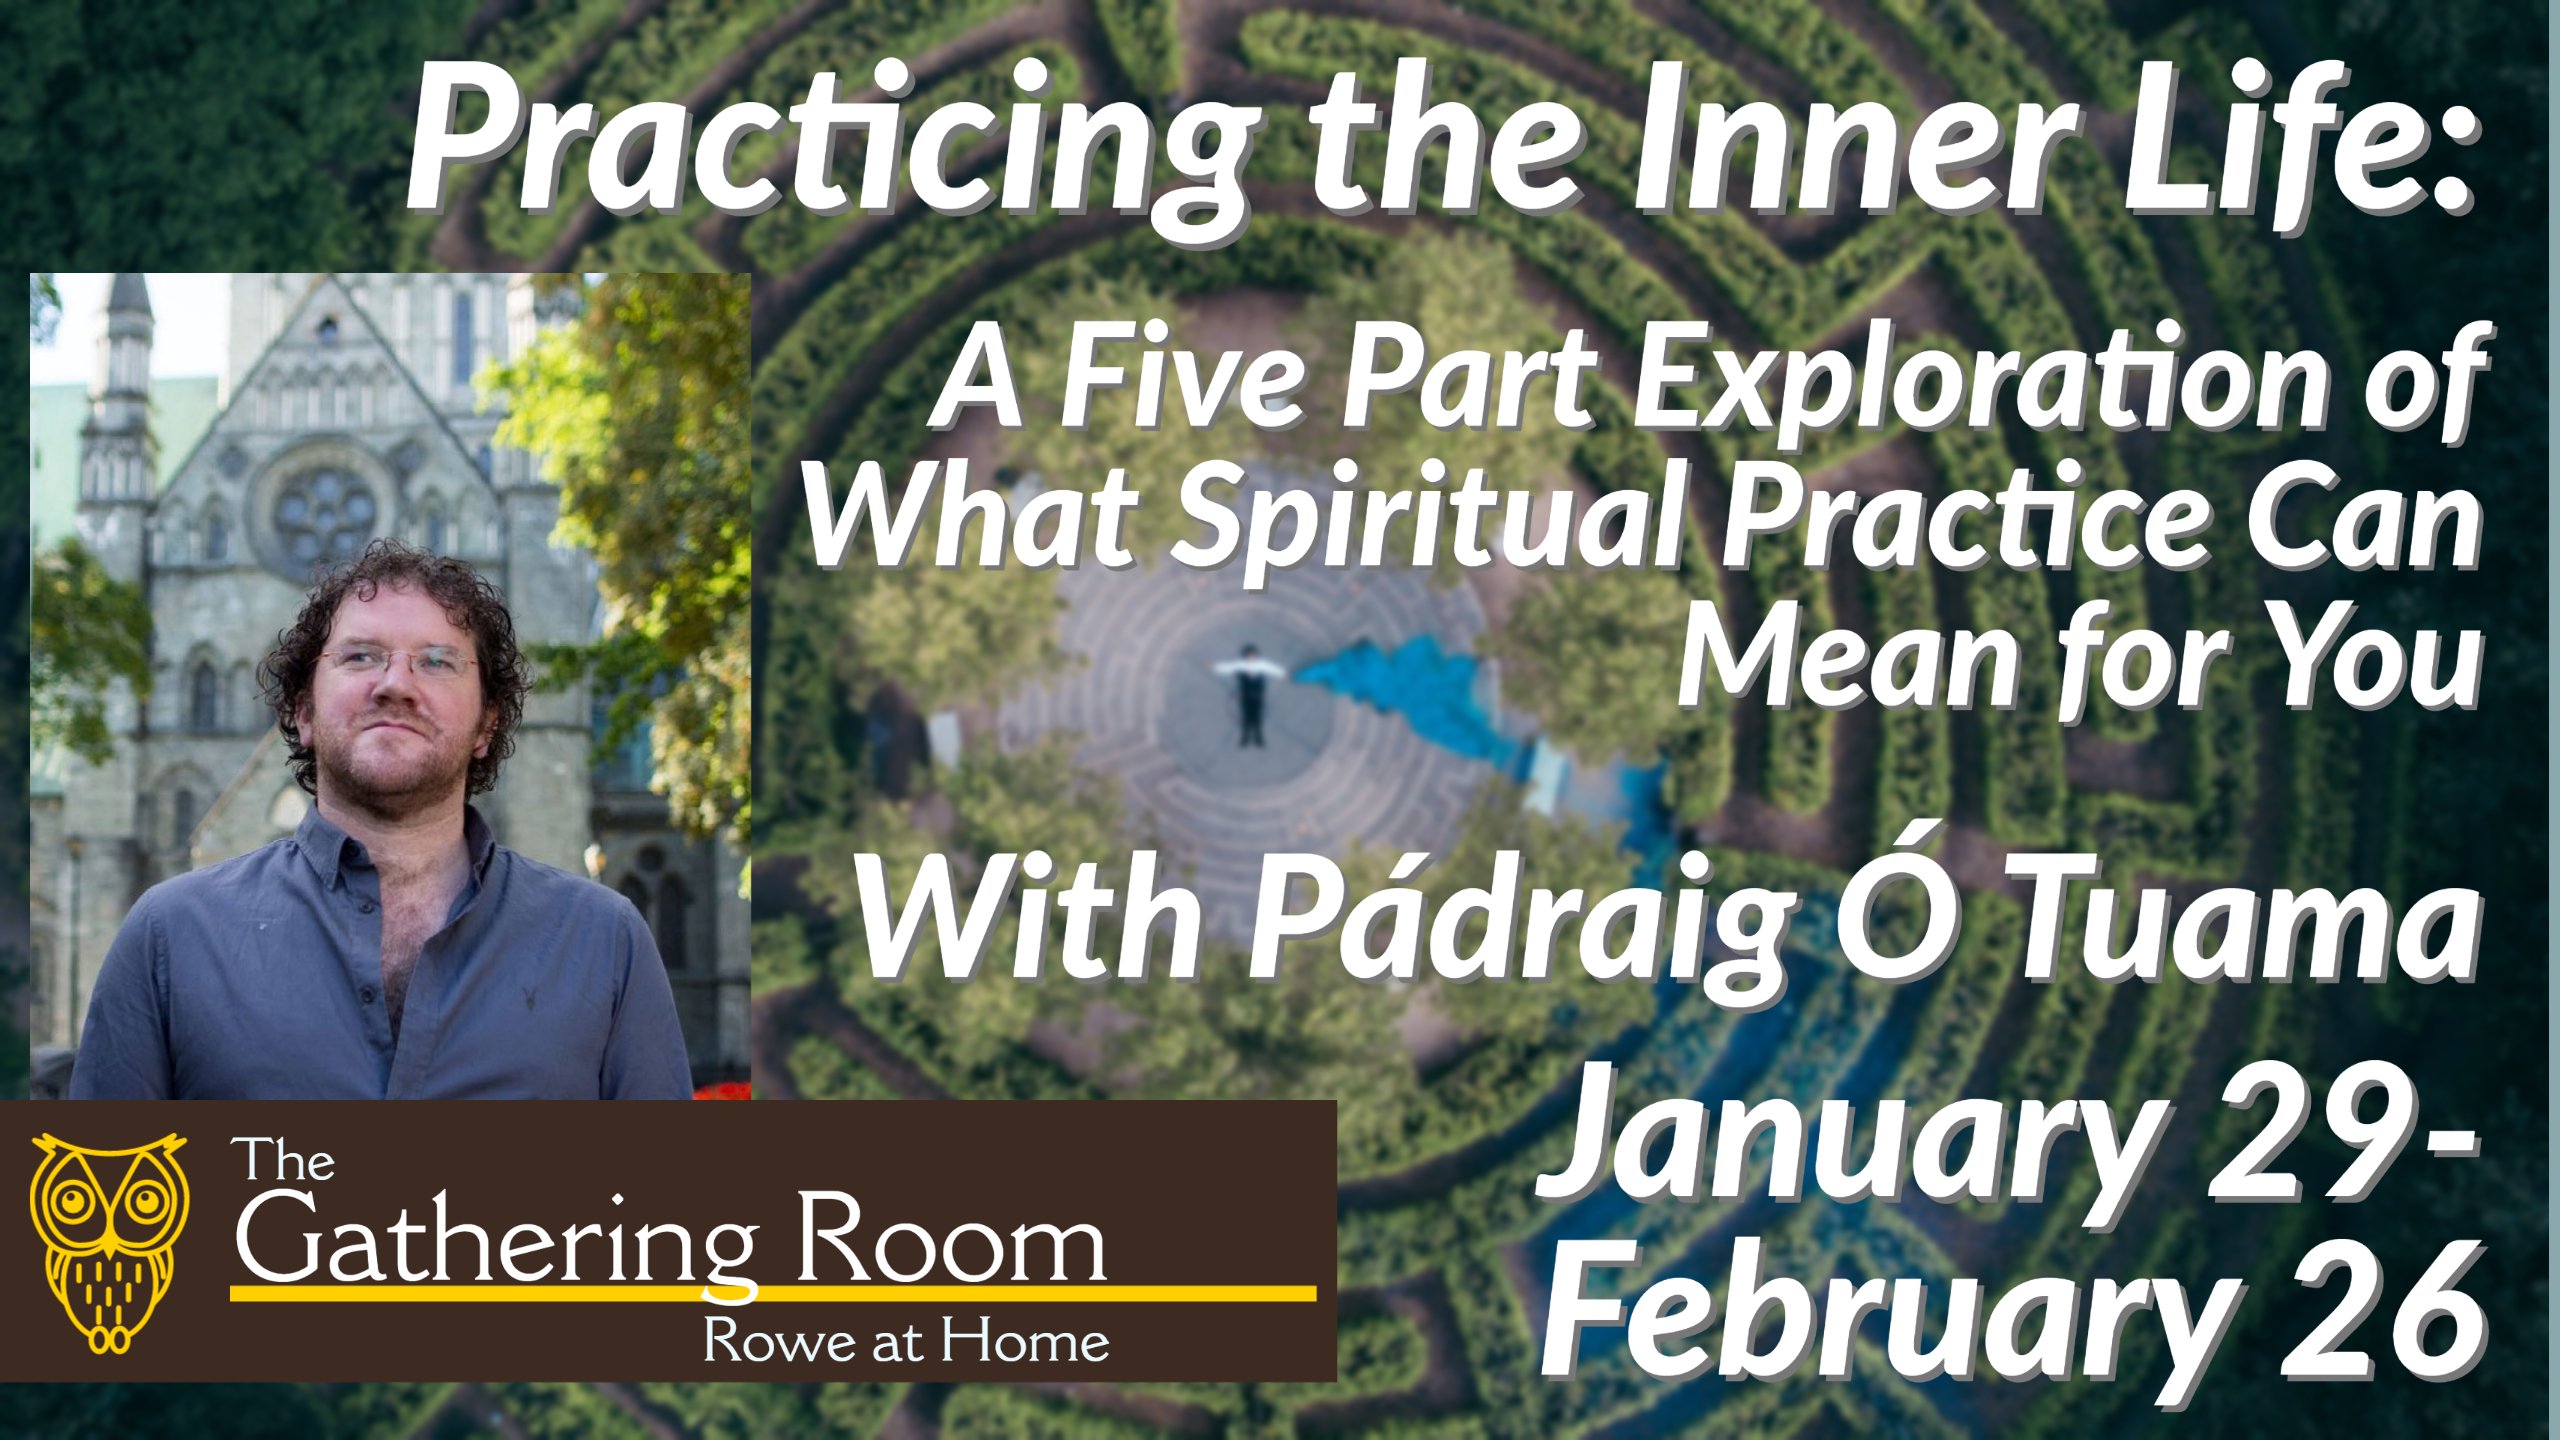 Practicing the Inner Life: A Five Part Exploration of What Spiritual Practice Can Mean for You